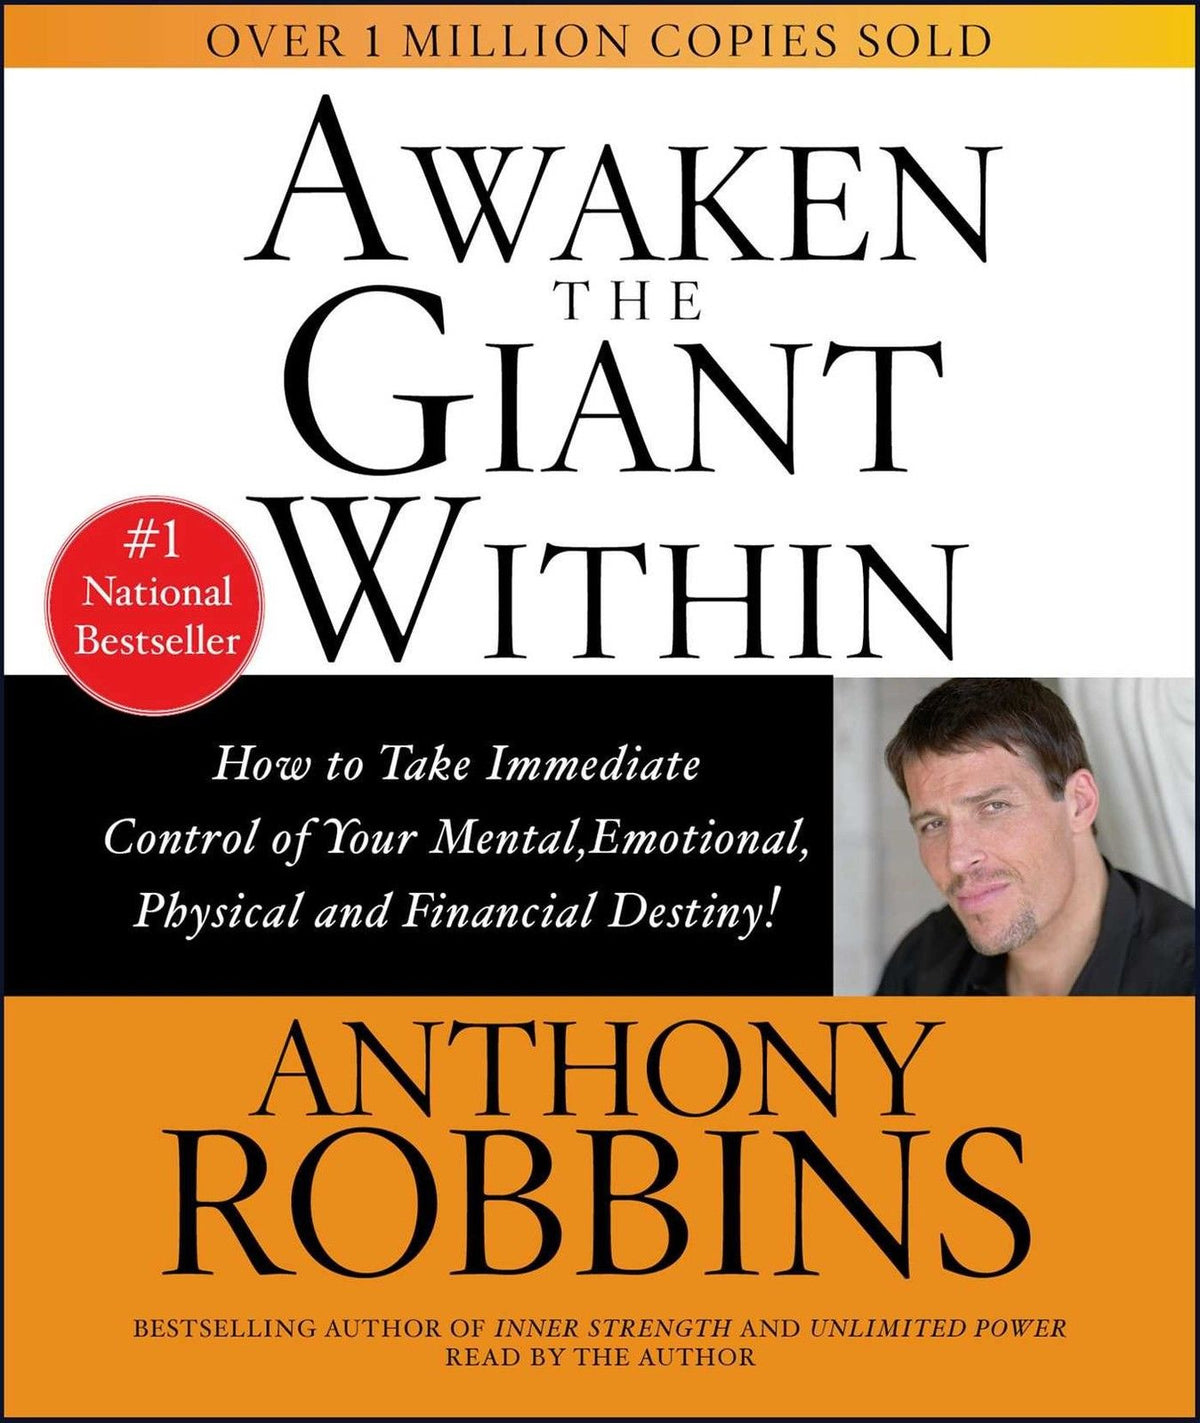 Awaken The Giant Within by Anthony Robbins, Audio CD